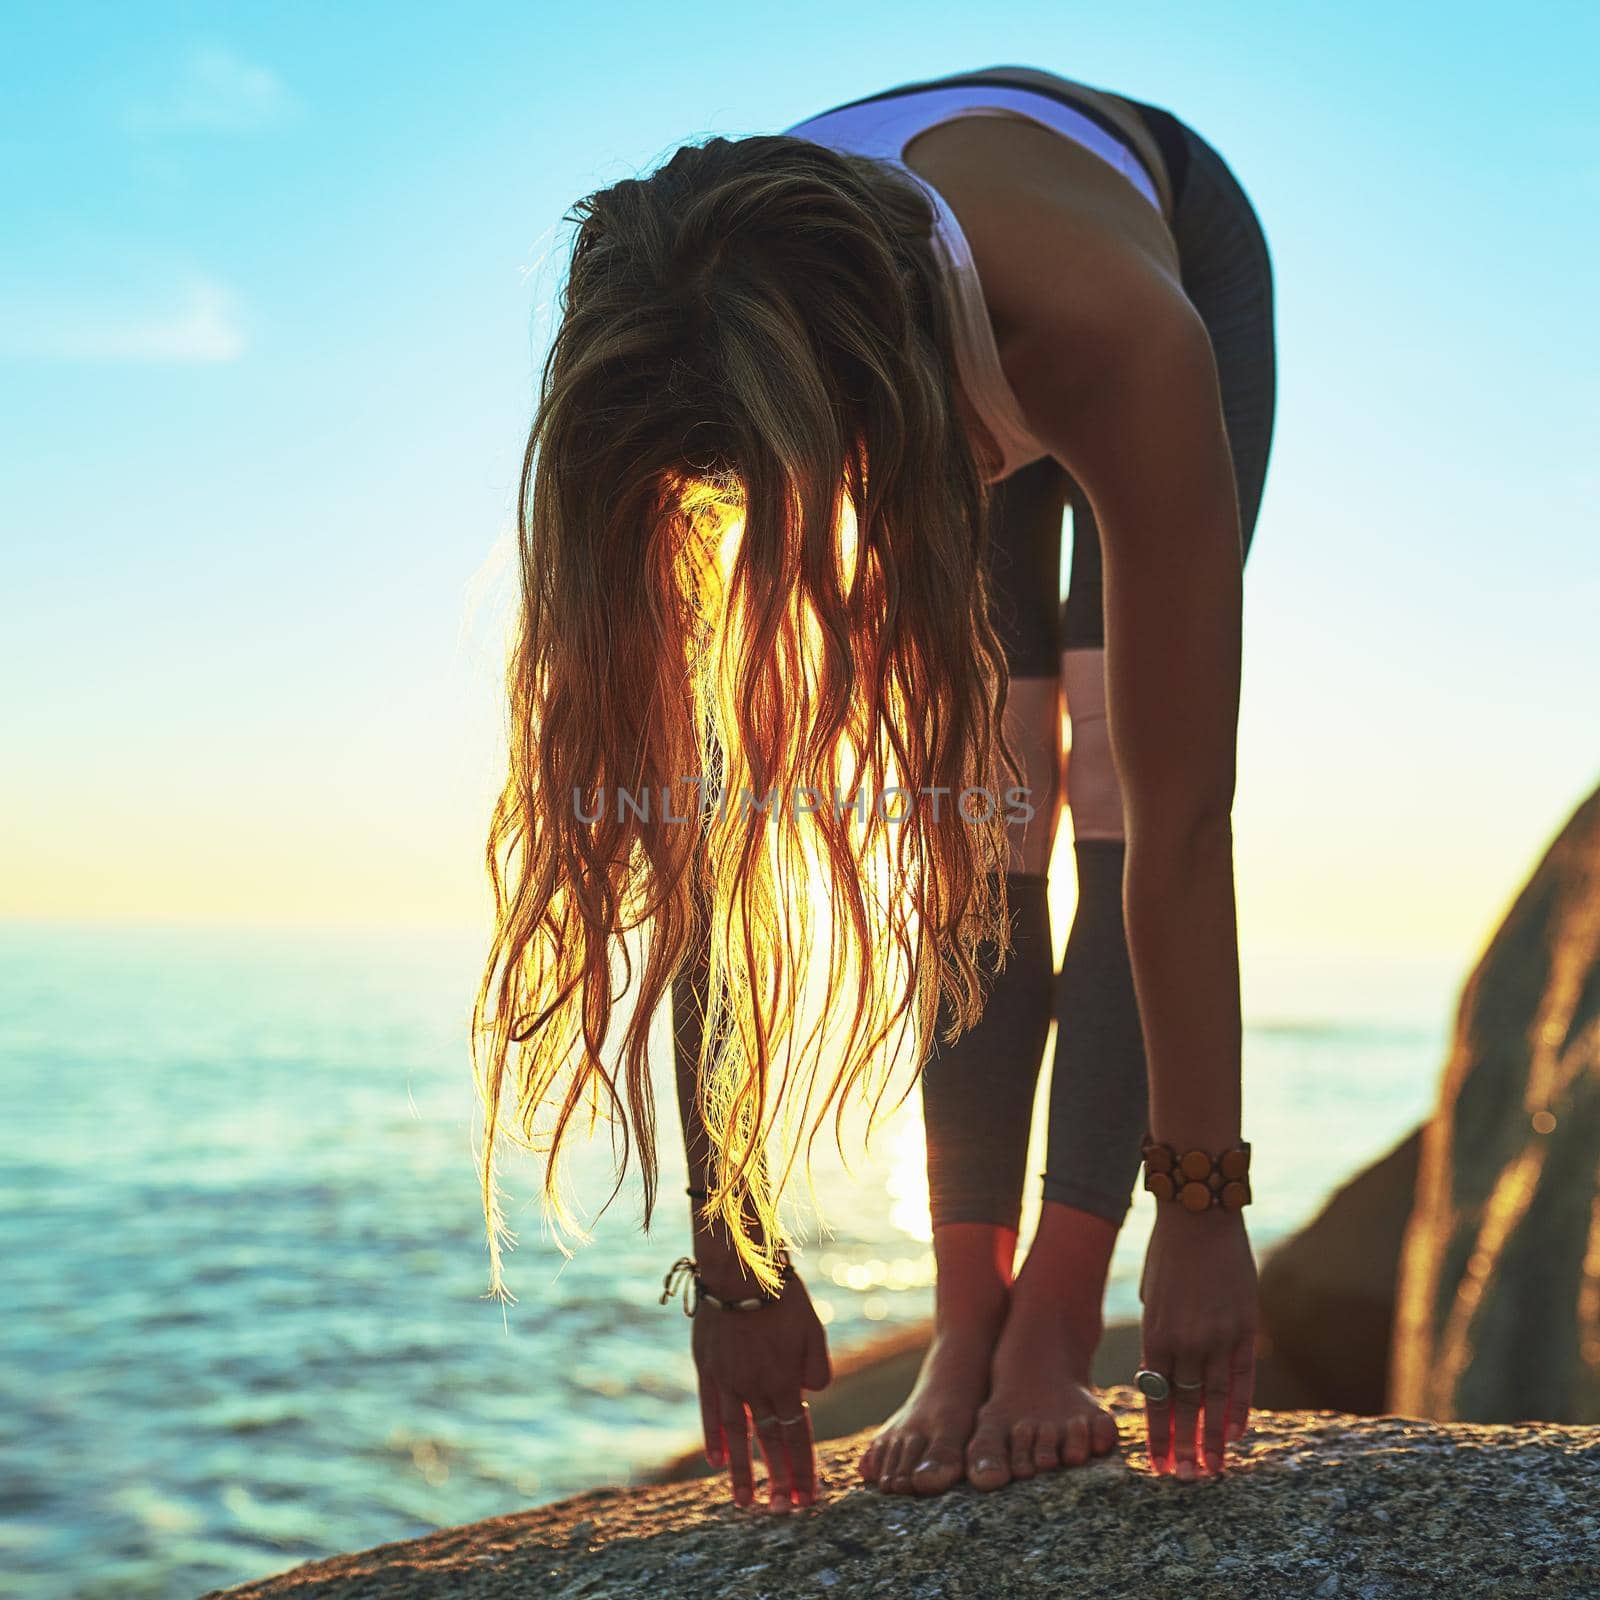 Allow yourself to let go. an athletic young woman practicing yoga on the beach